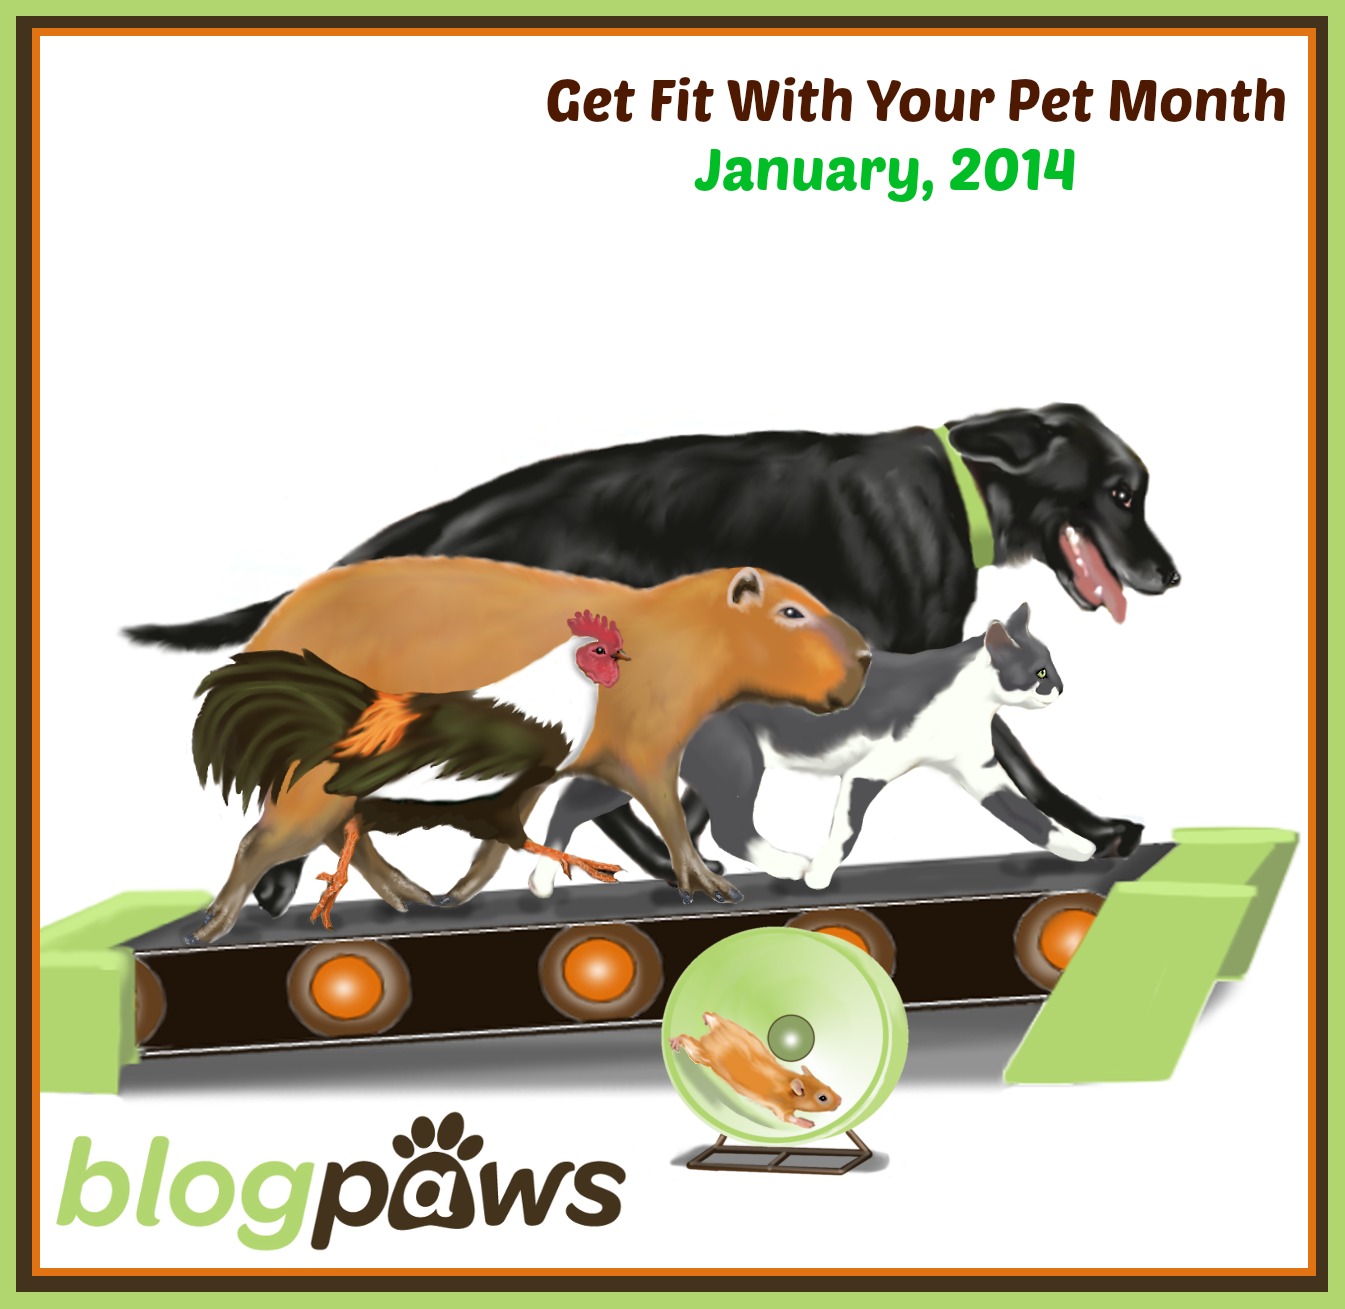 Get Fit with Your Pet Month